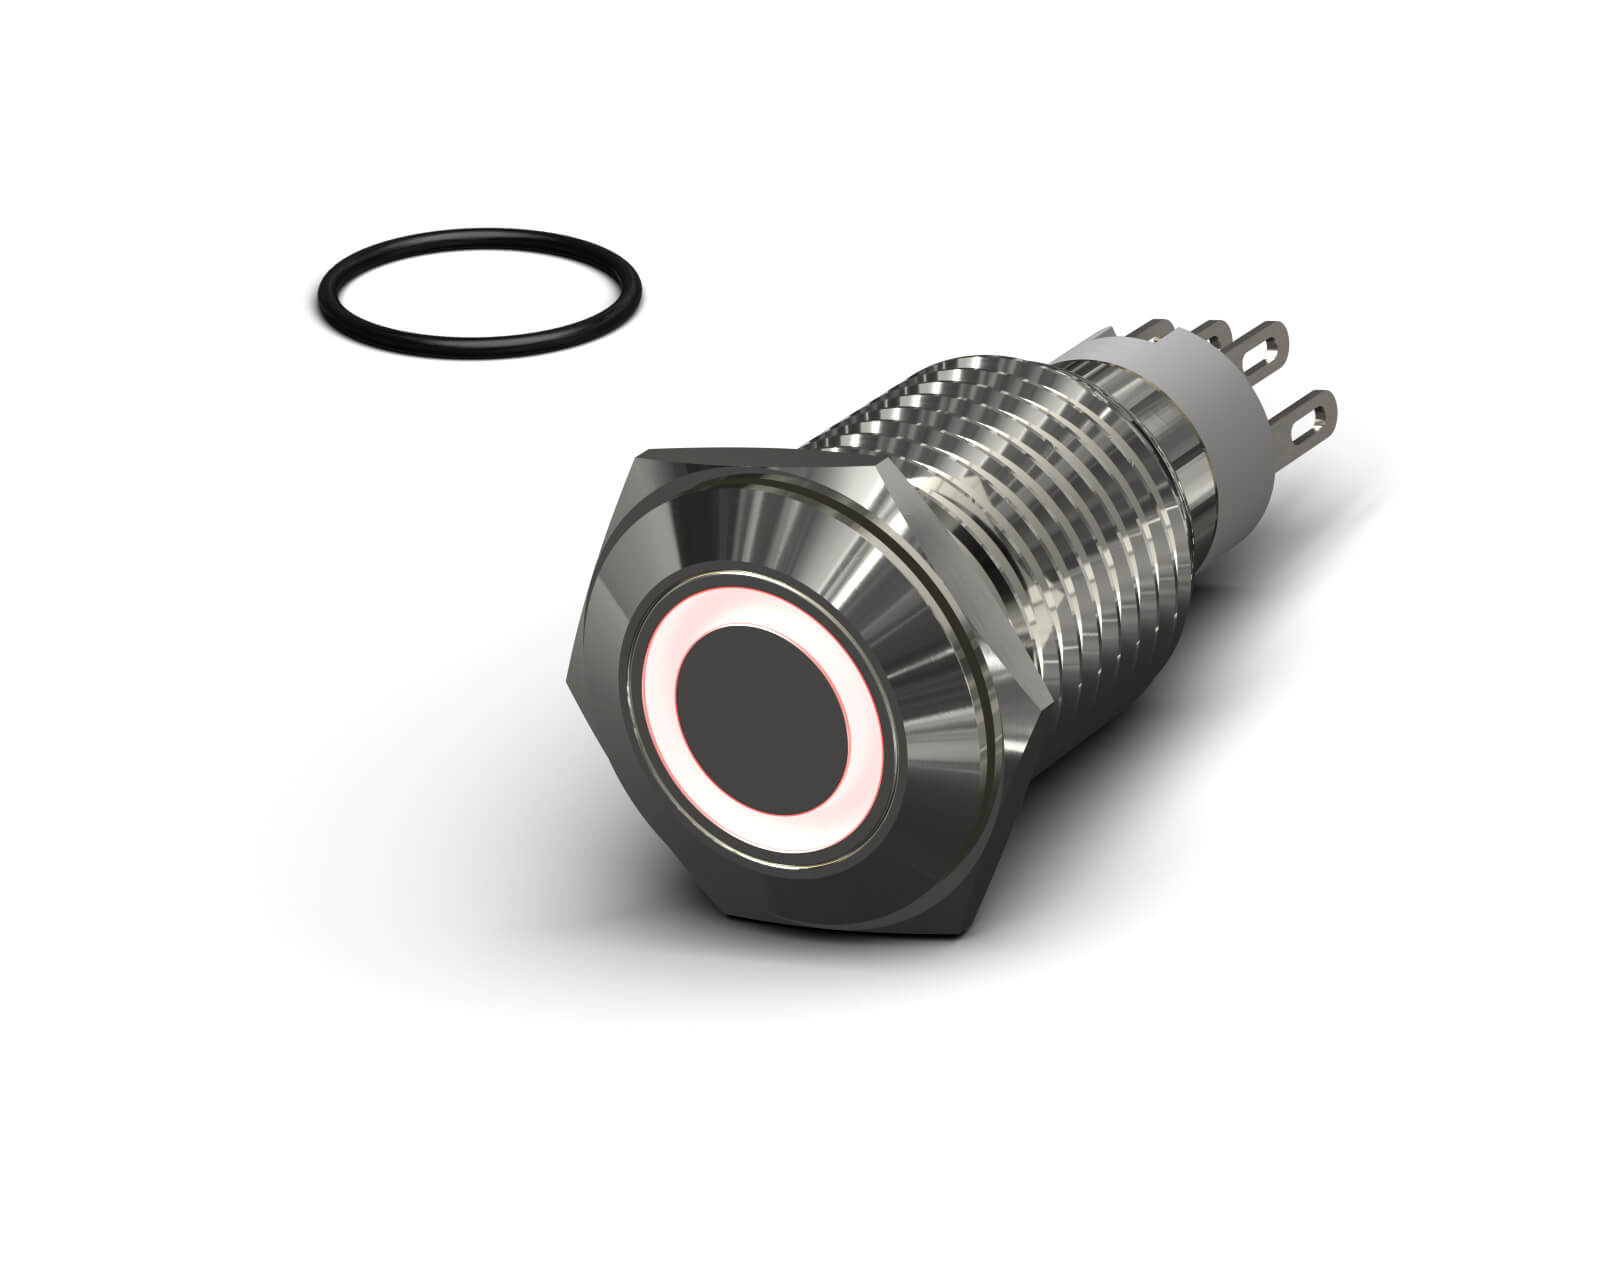 PrimoChill Silver Aluminum Latching Vandal Switch - 16mm - Ring Illumination - Red LED - Red LED Ring